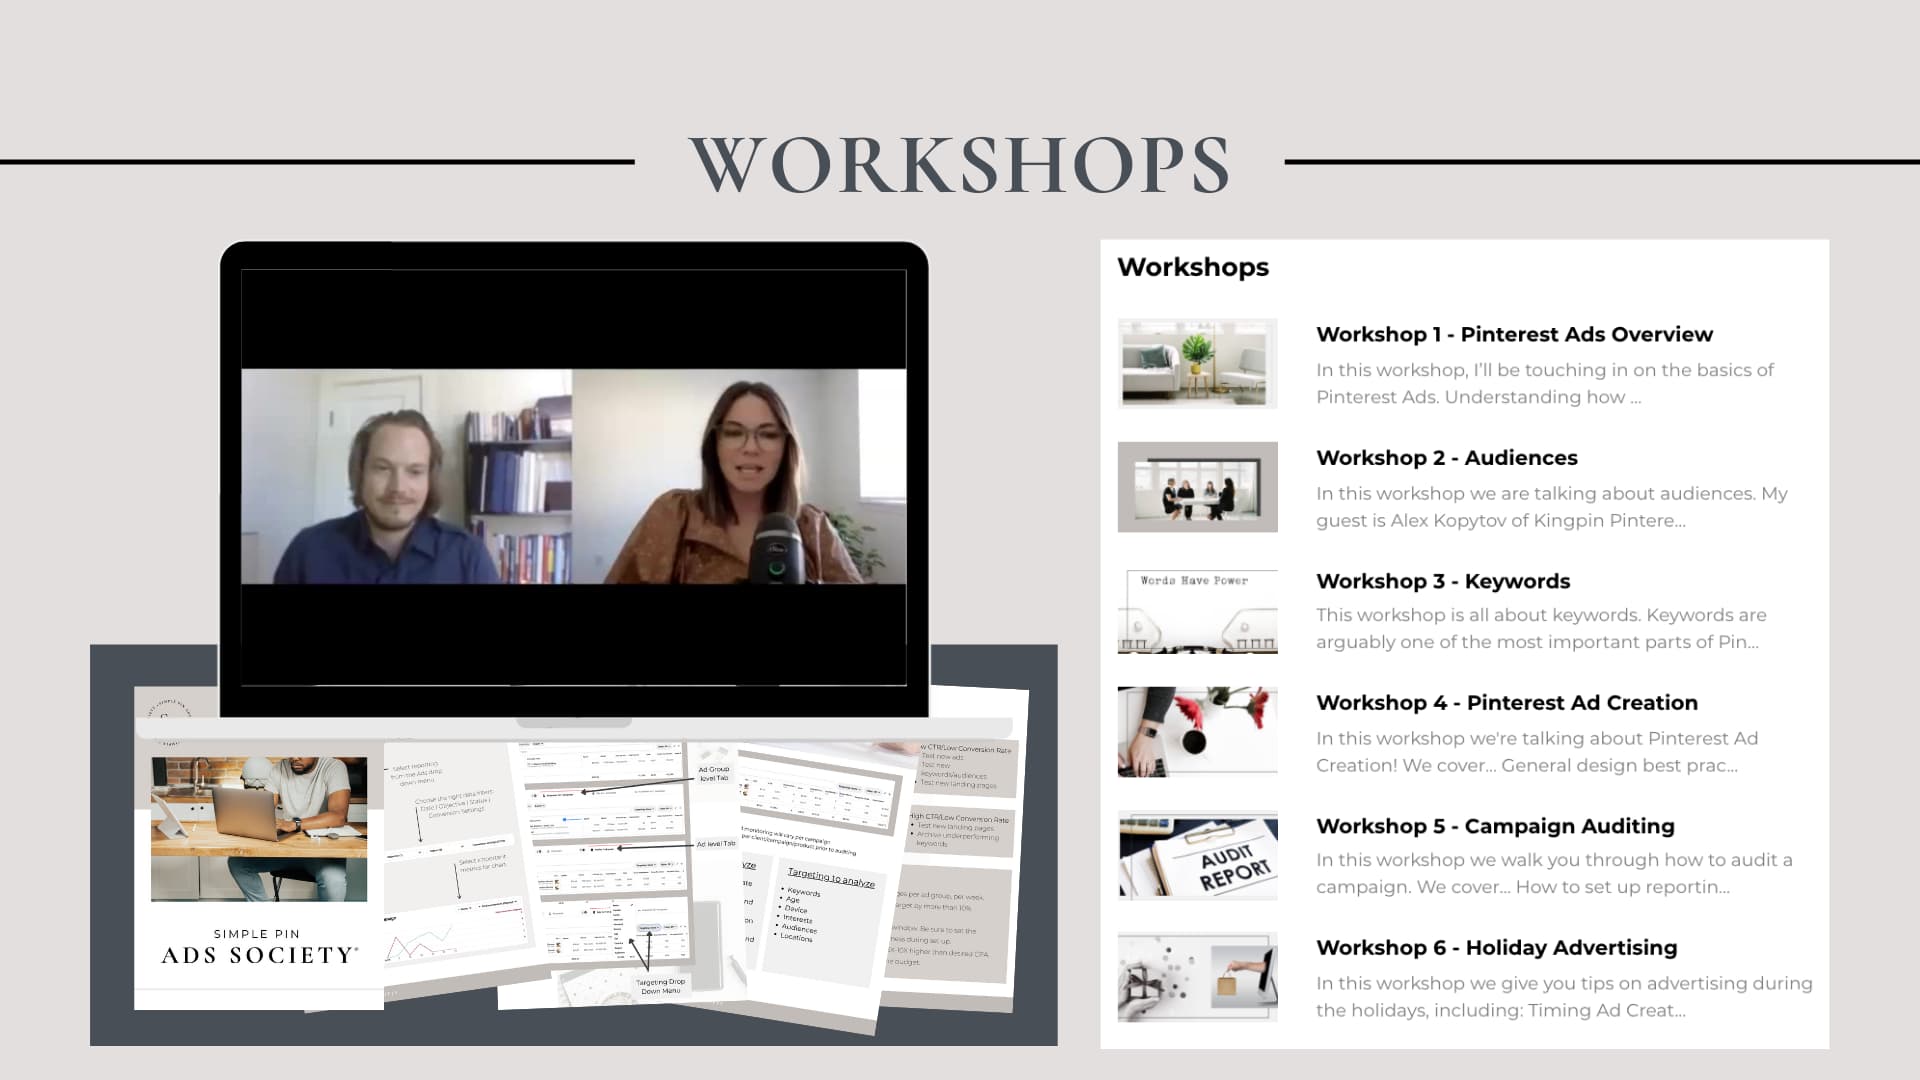 screen capture of zoom call with man and woman next to list of workshop titles.